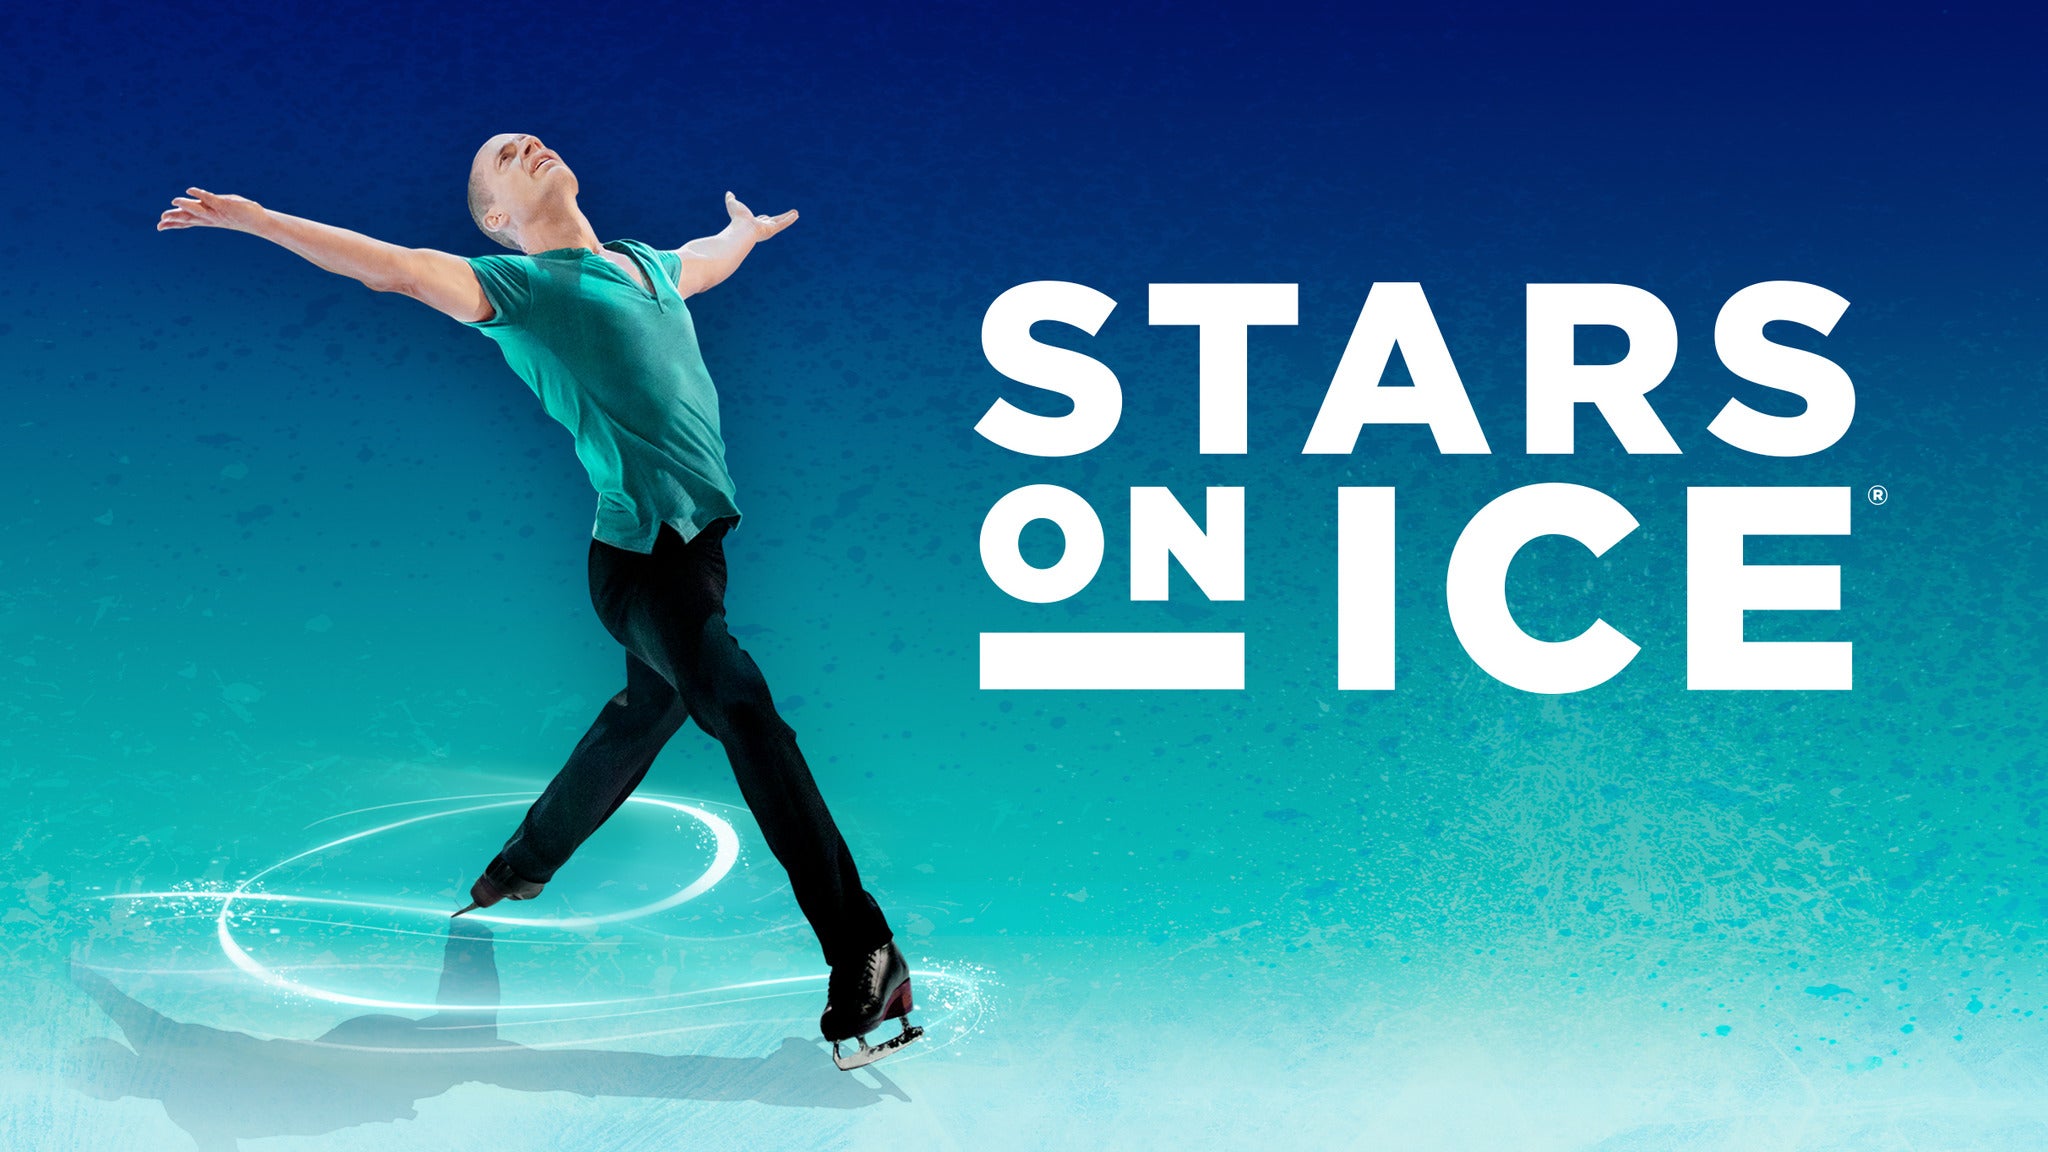 Stars on Ice - Canada presale password for early tickets in Calgary